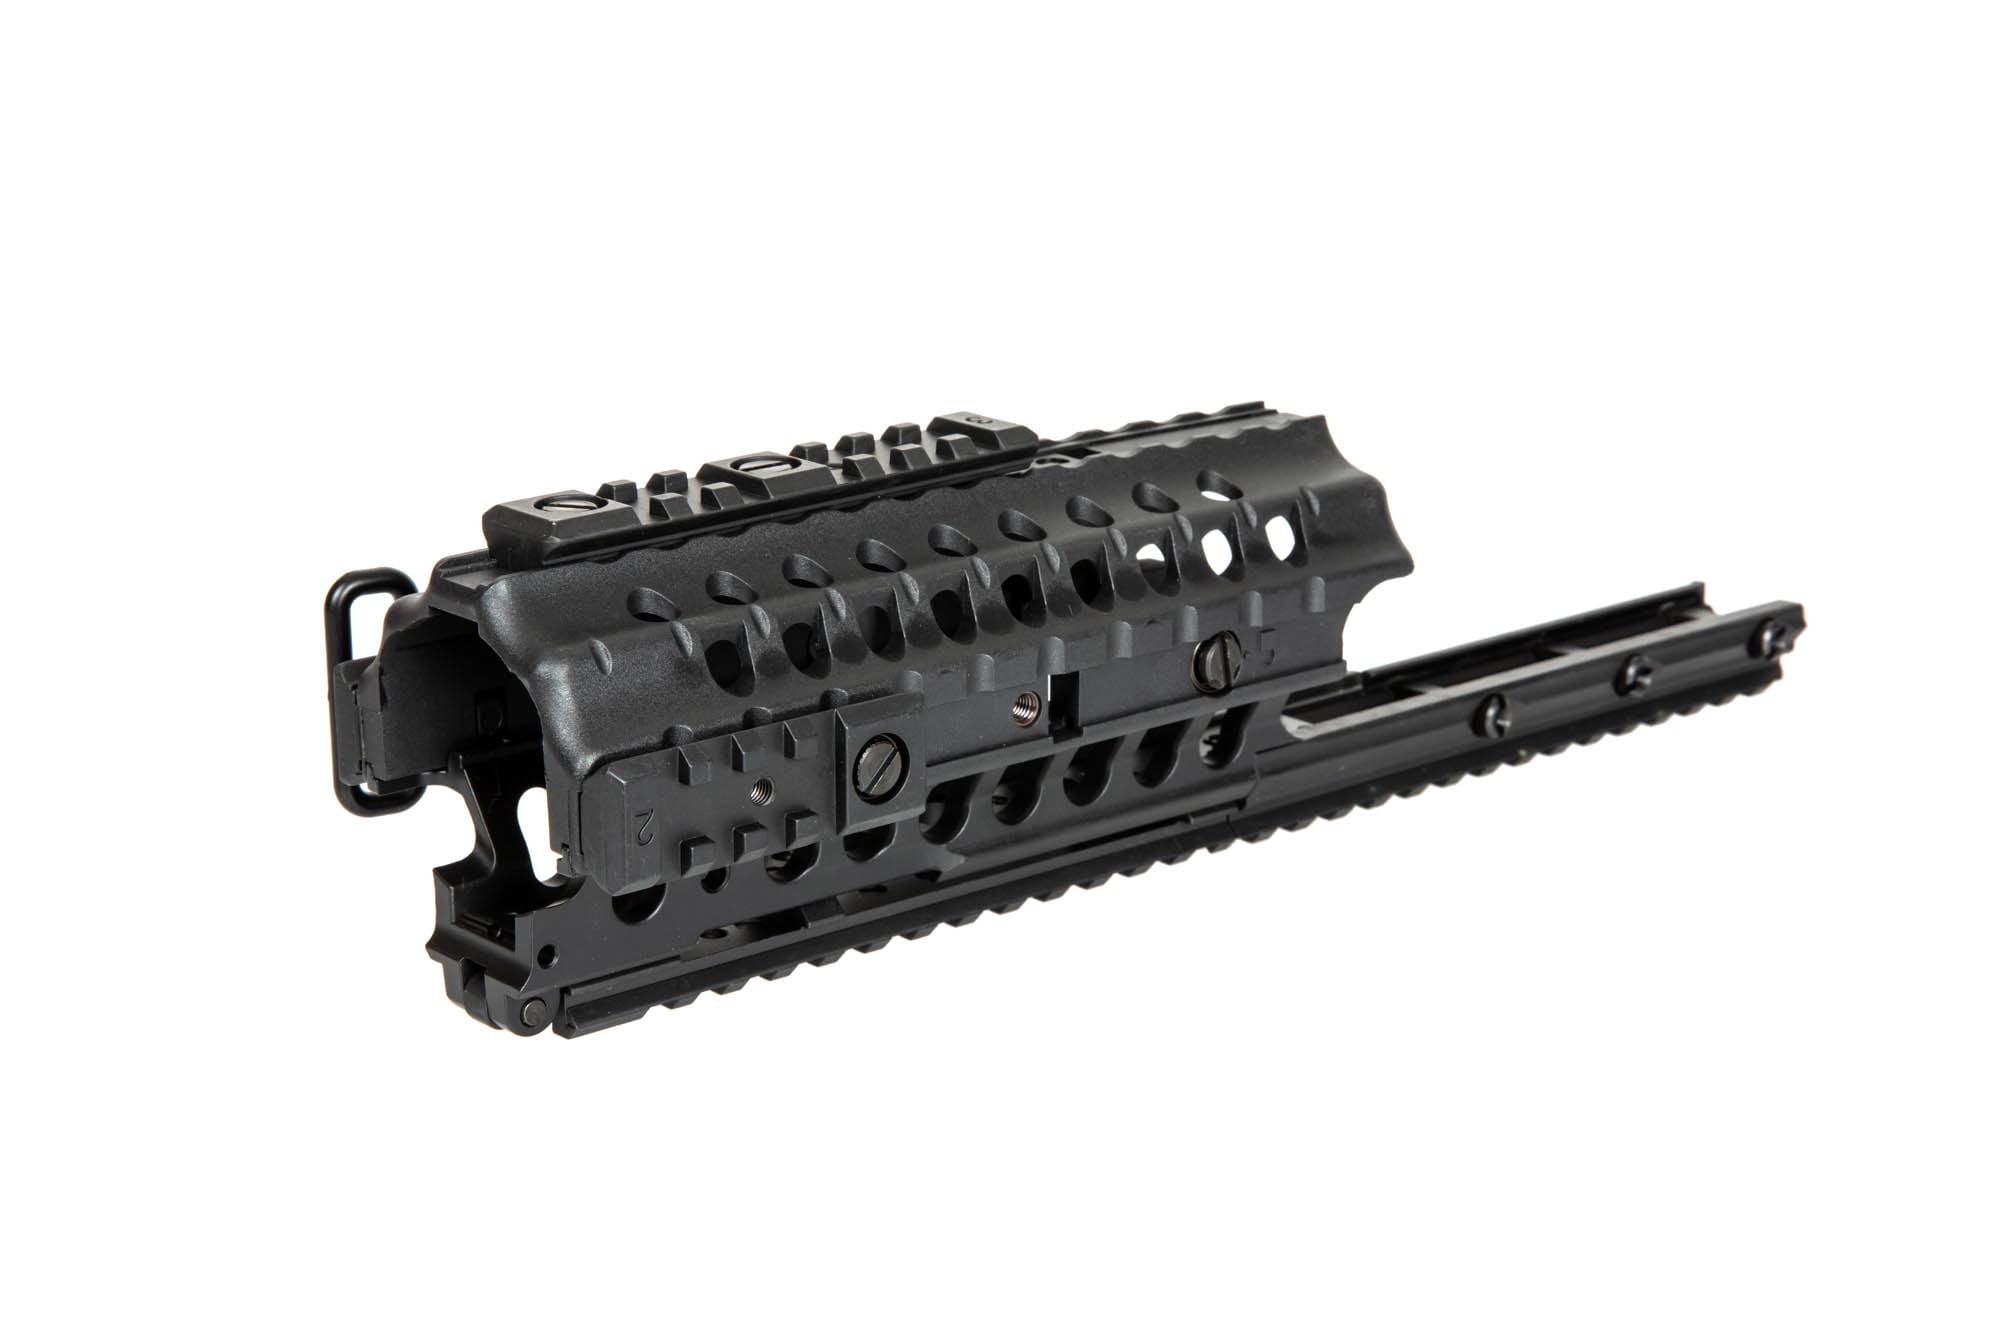 CS4 SIR Handguard for M4 / M16 replicas by ICS on Airsoft Mania Europe